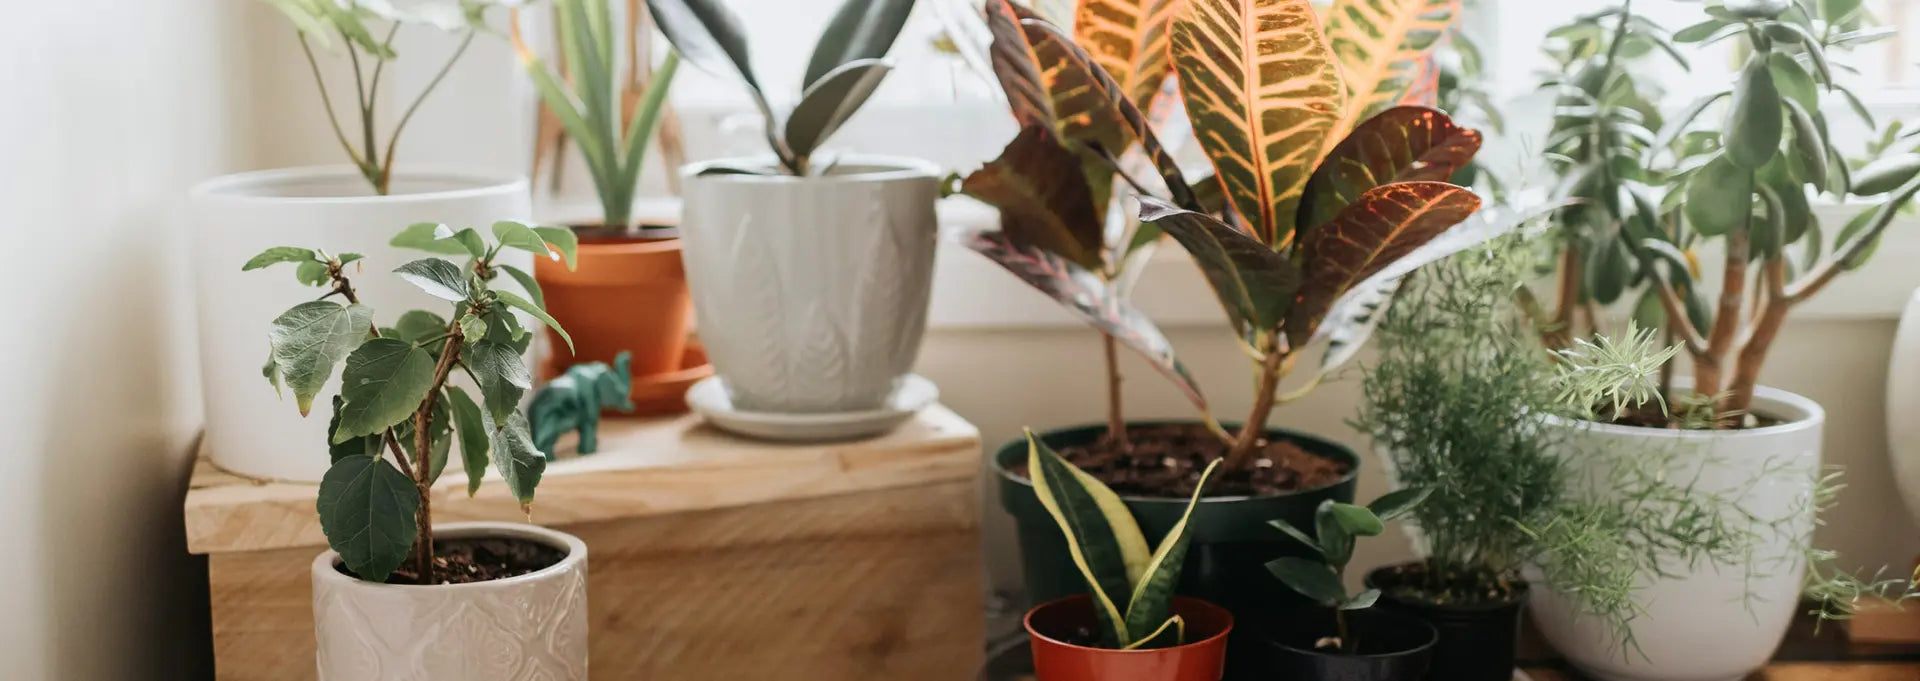 Easy Care Indoor Plants - Plants By Post